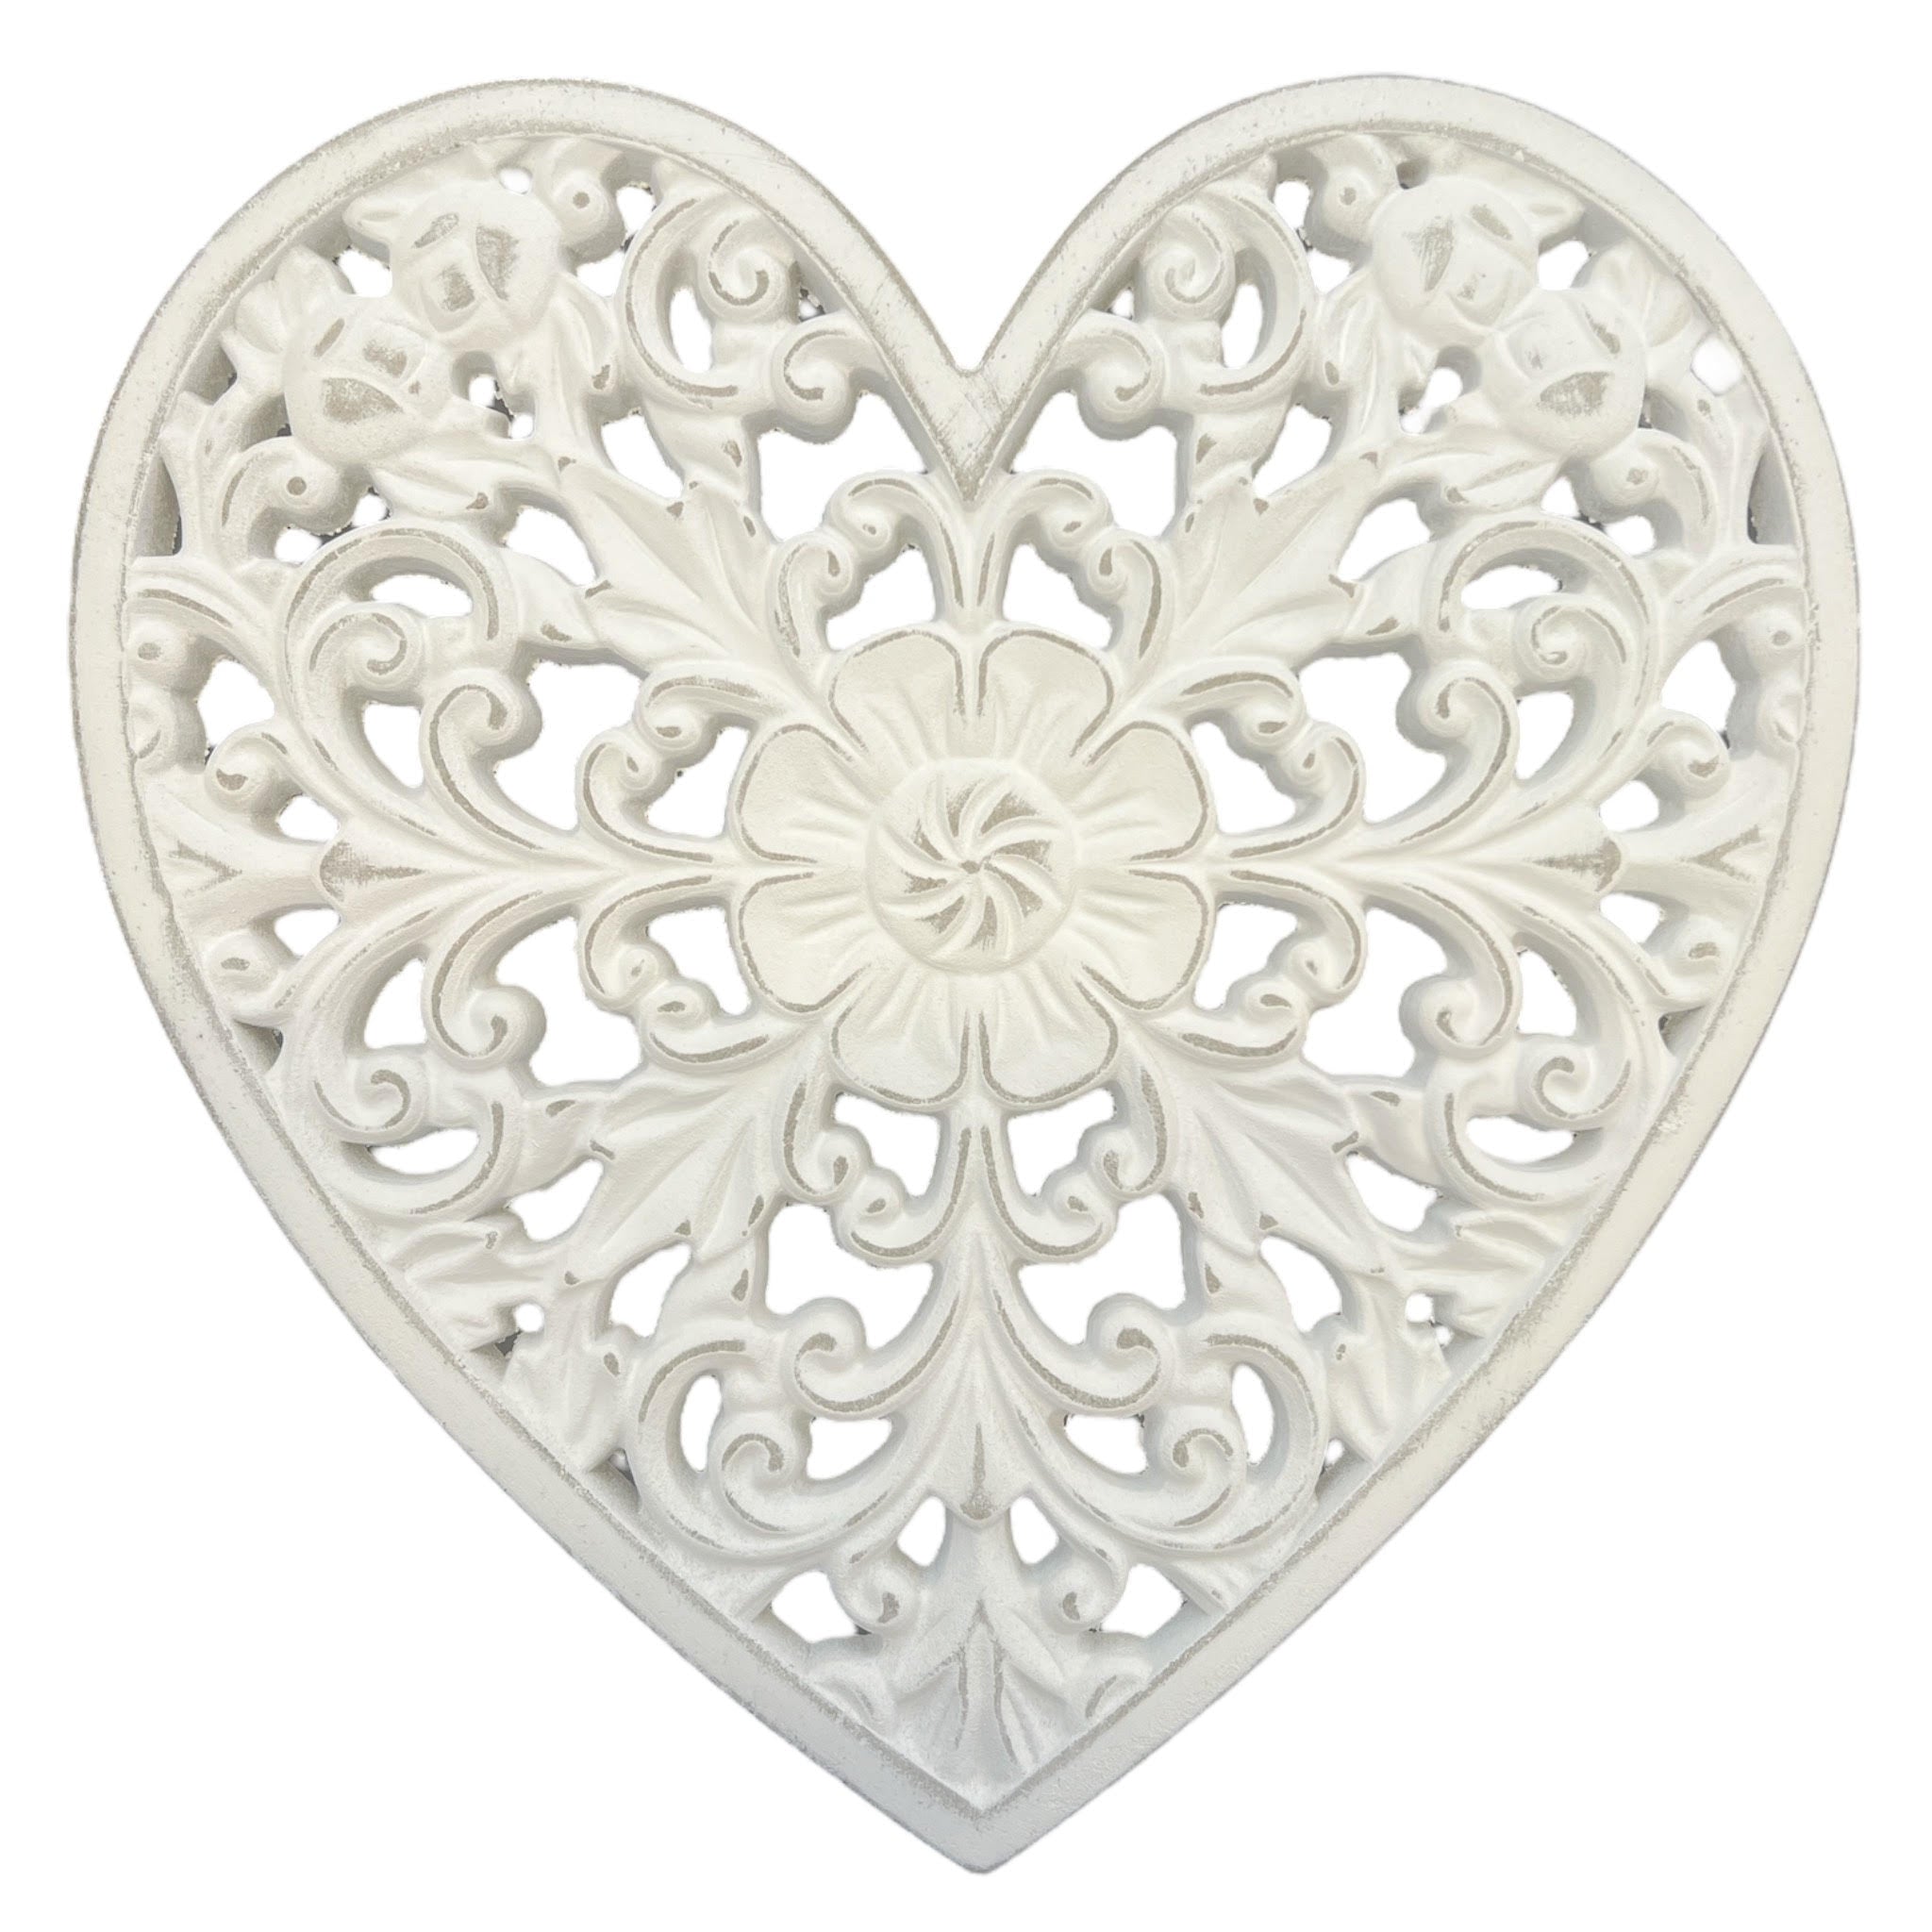 White Distressed Wood Carved Heart Decorative Wall Plaque